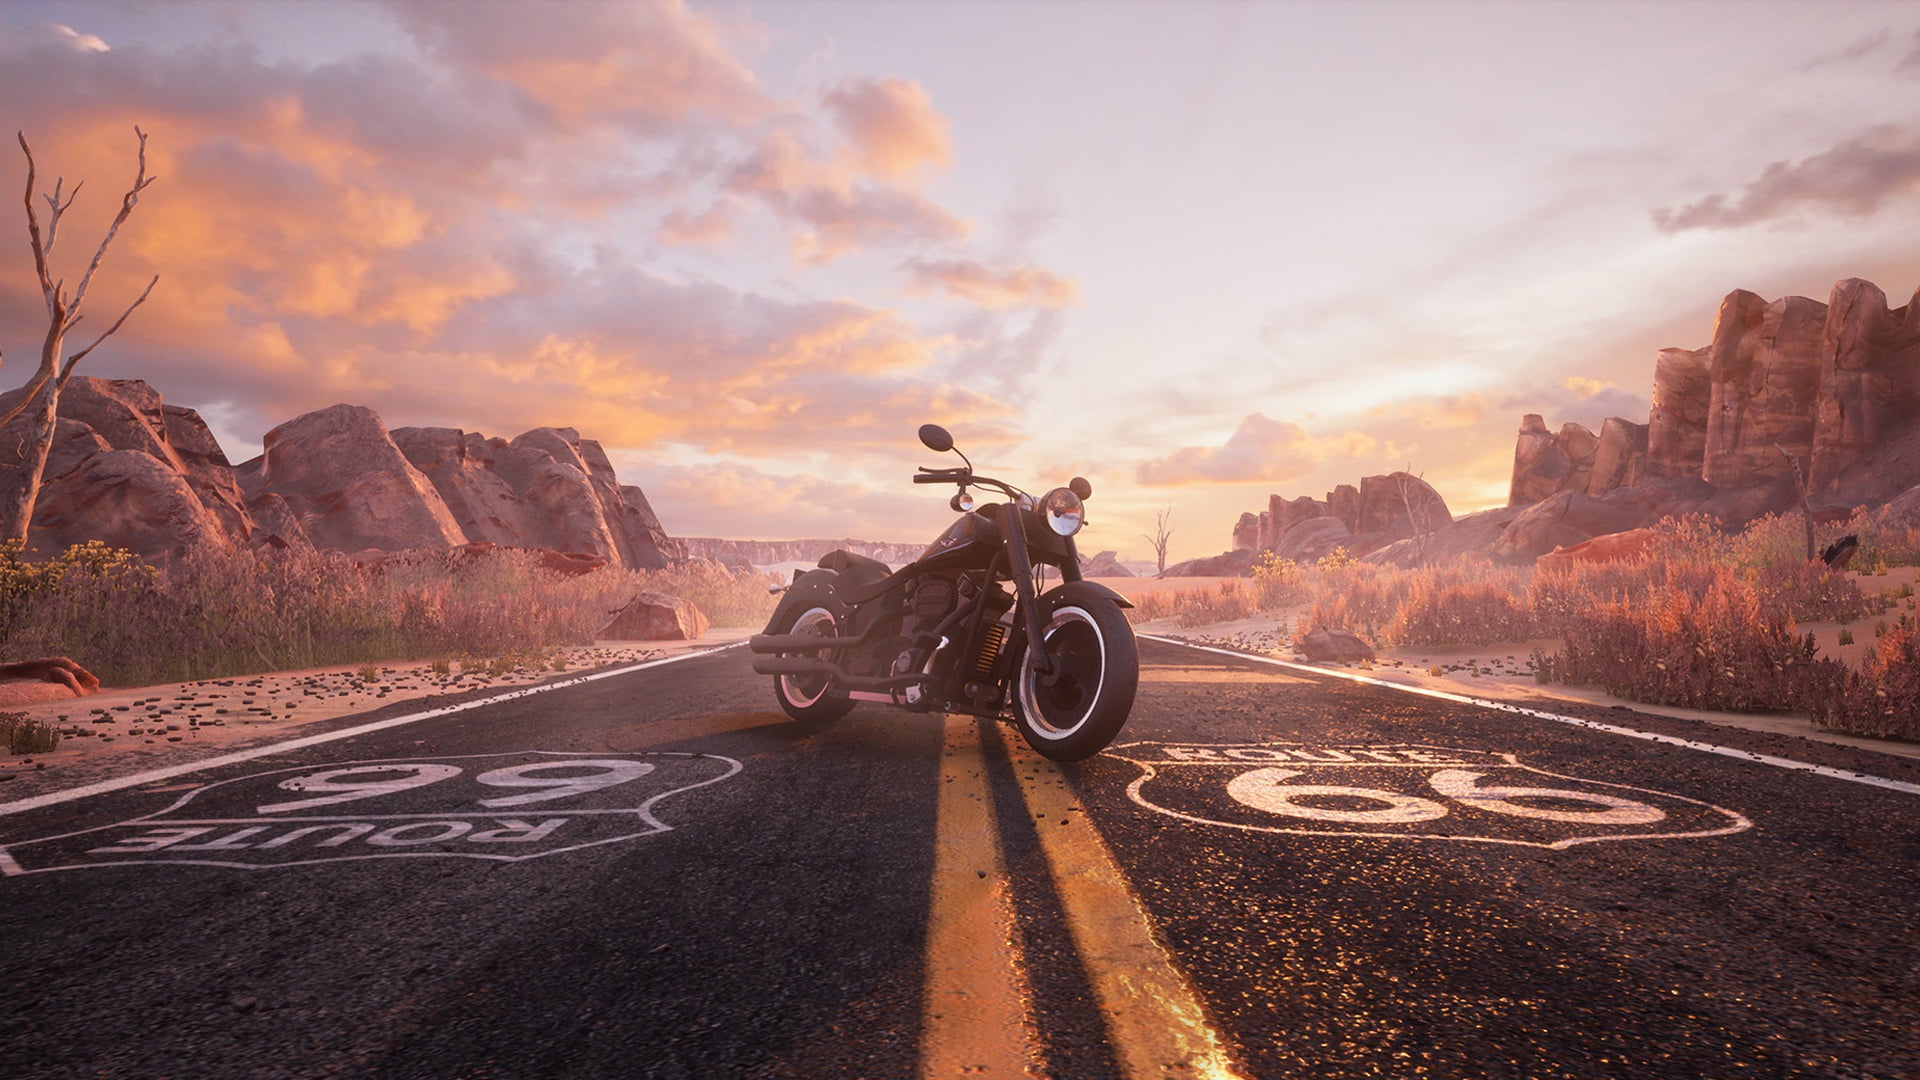 road, numbers, Route 66, motorcycle, vehicle, landscape, sky